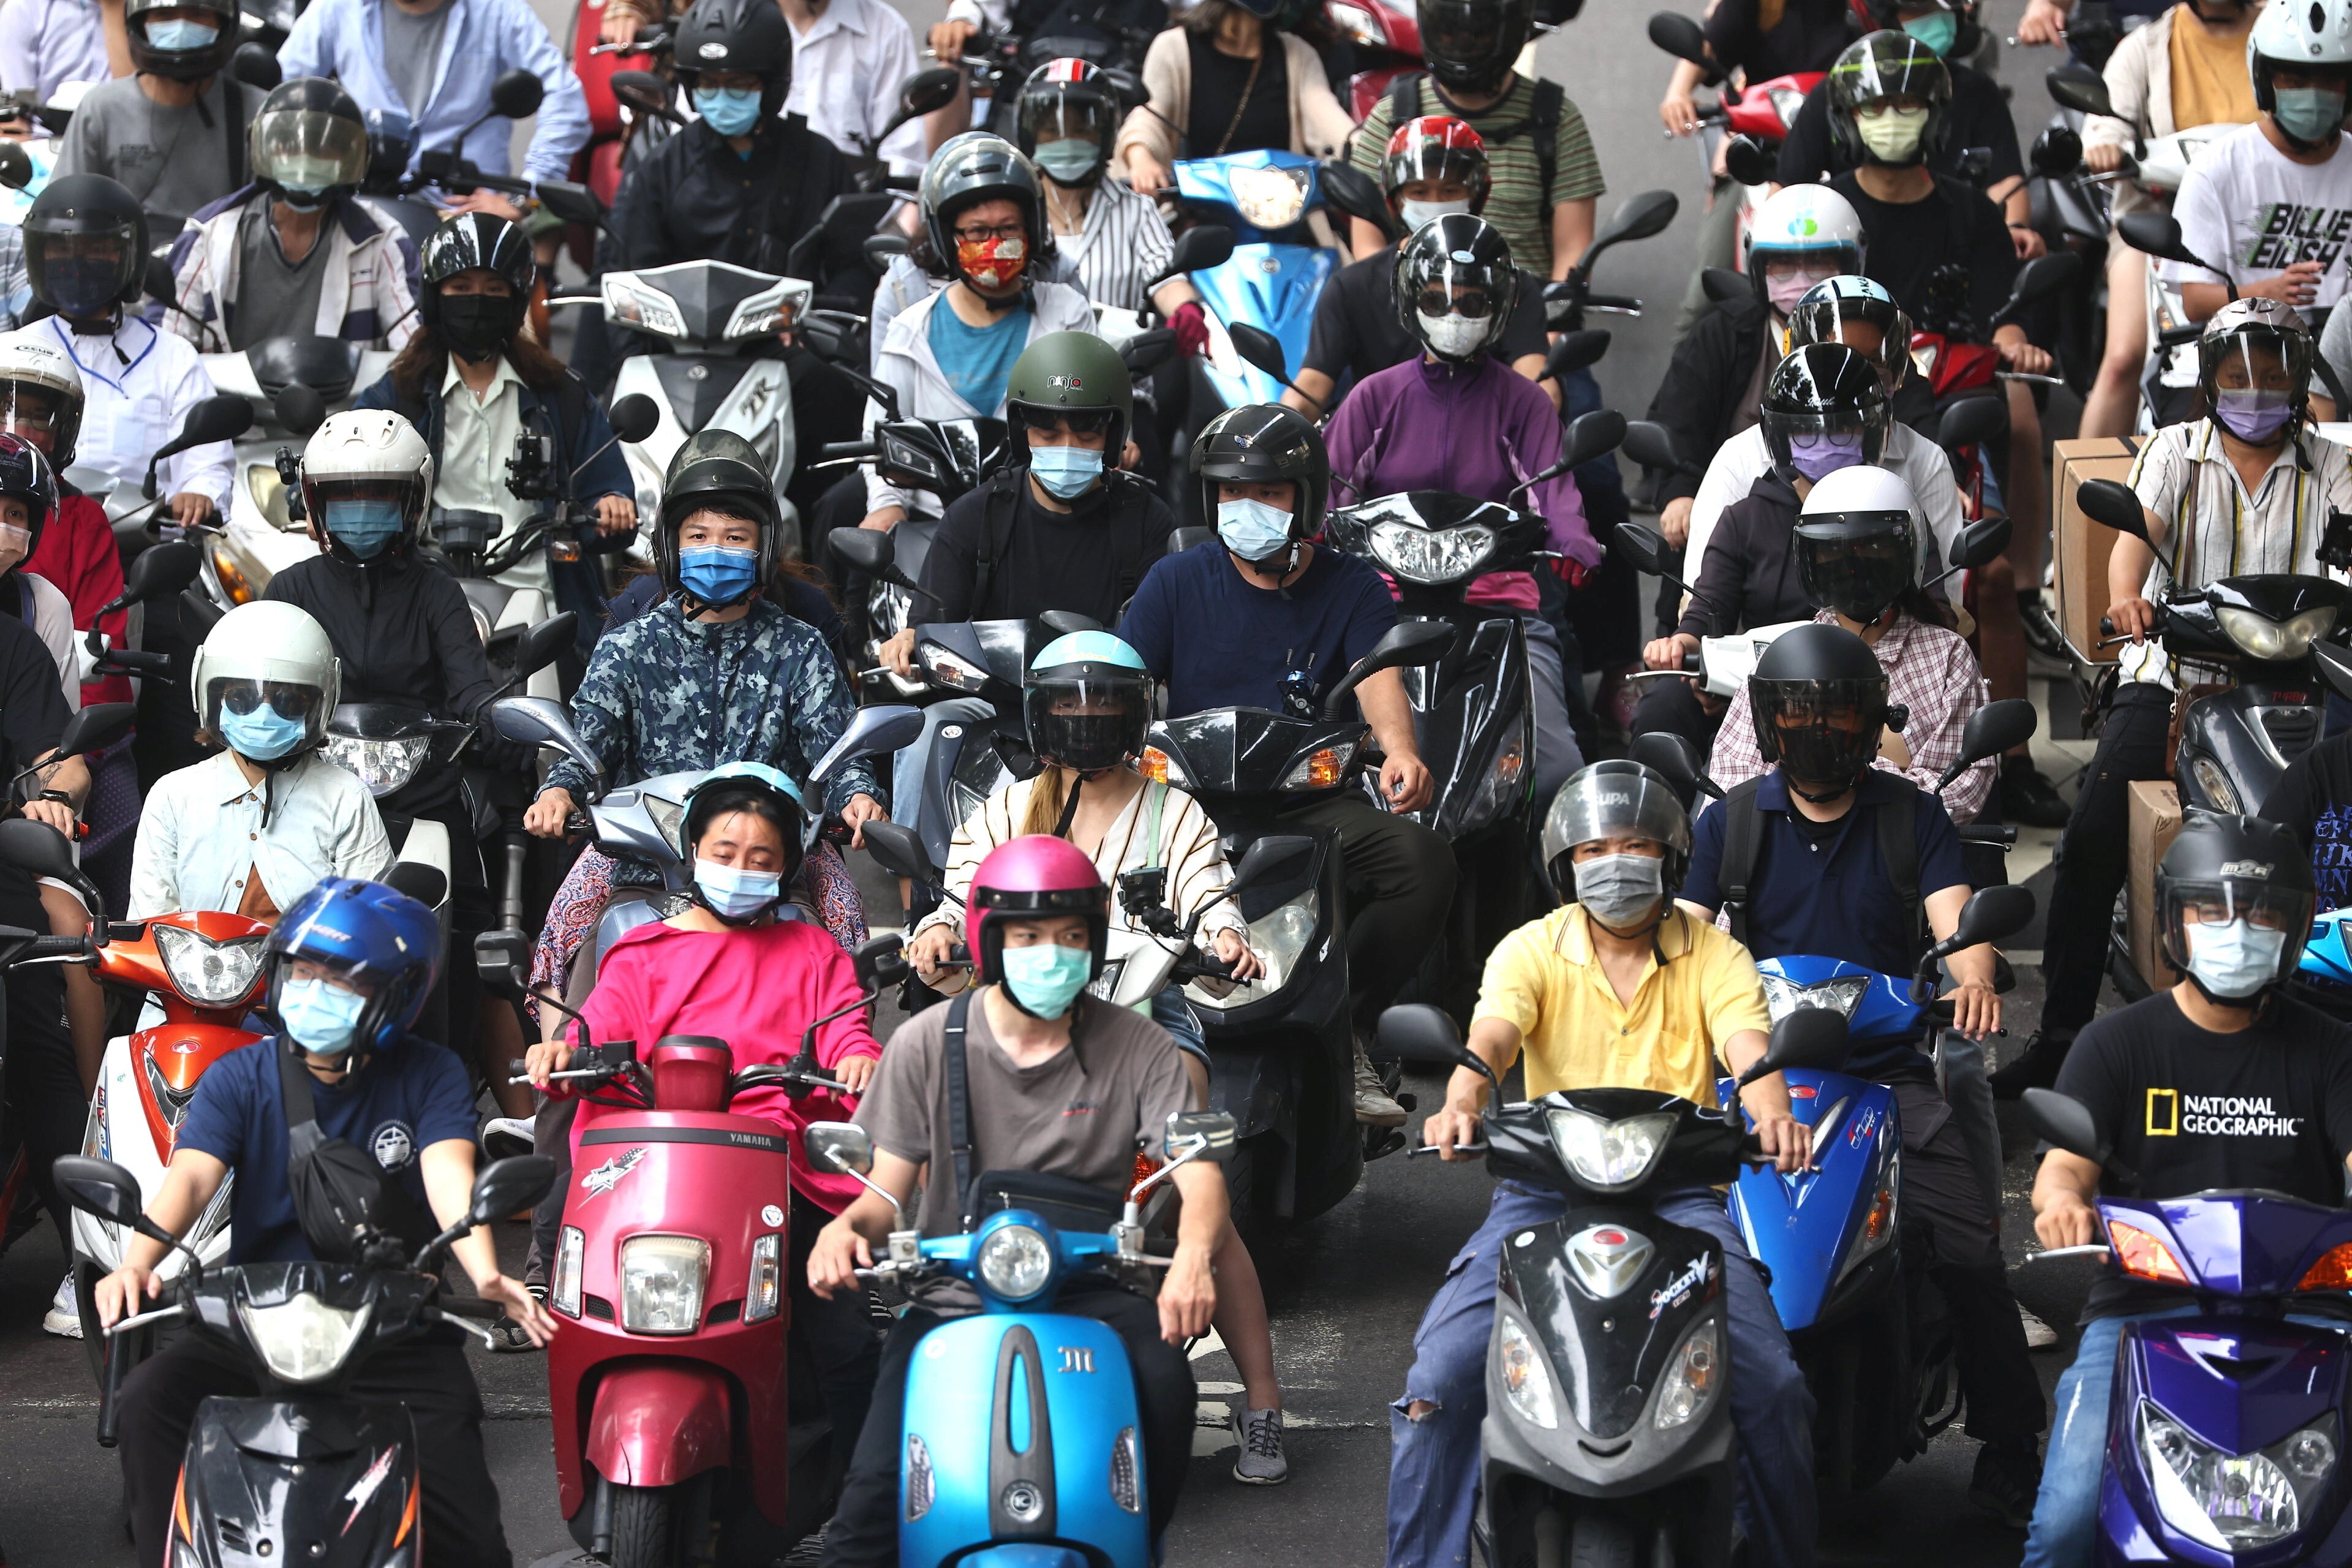 Moped riders in Tapei, Taiwan, wait at a traffic light on May 18. After keeping Covid-19 under control for months, Taiwan is grappling with a recent wave of infections. With many societies still far from achieving herd immunity, we need to be prepared to coexist with the virus over the coming years. Photo: Reuters